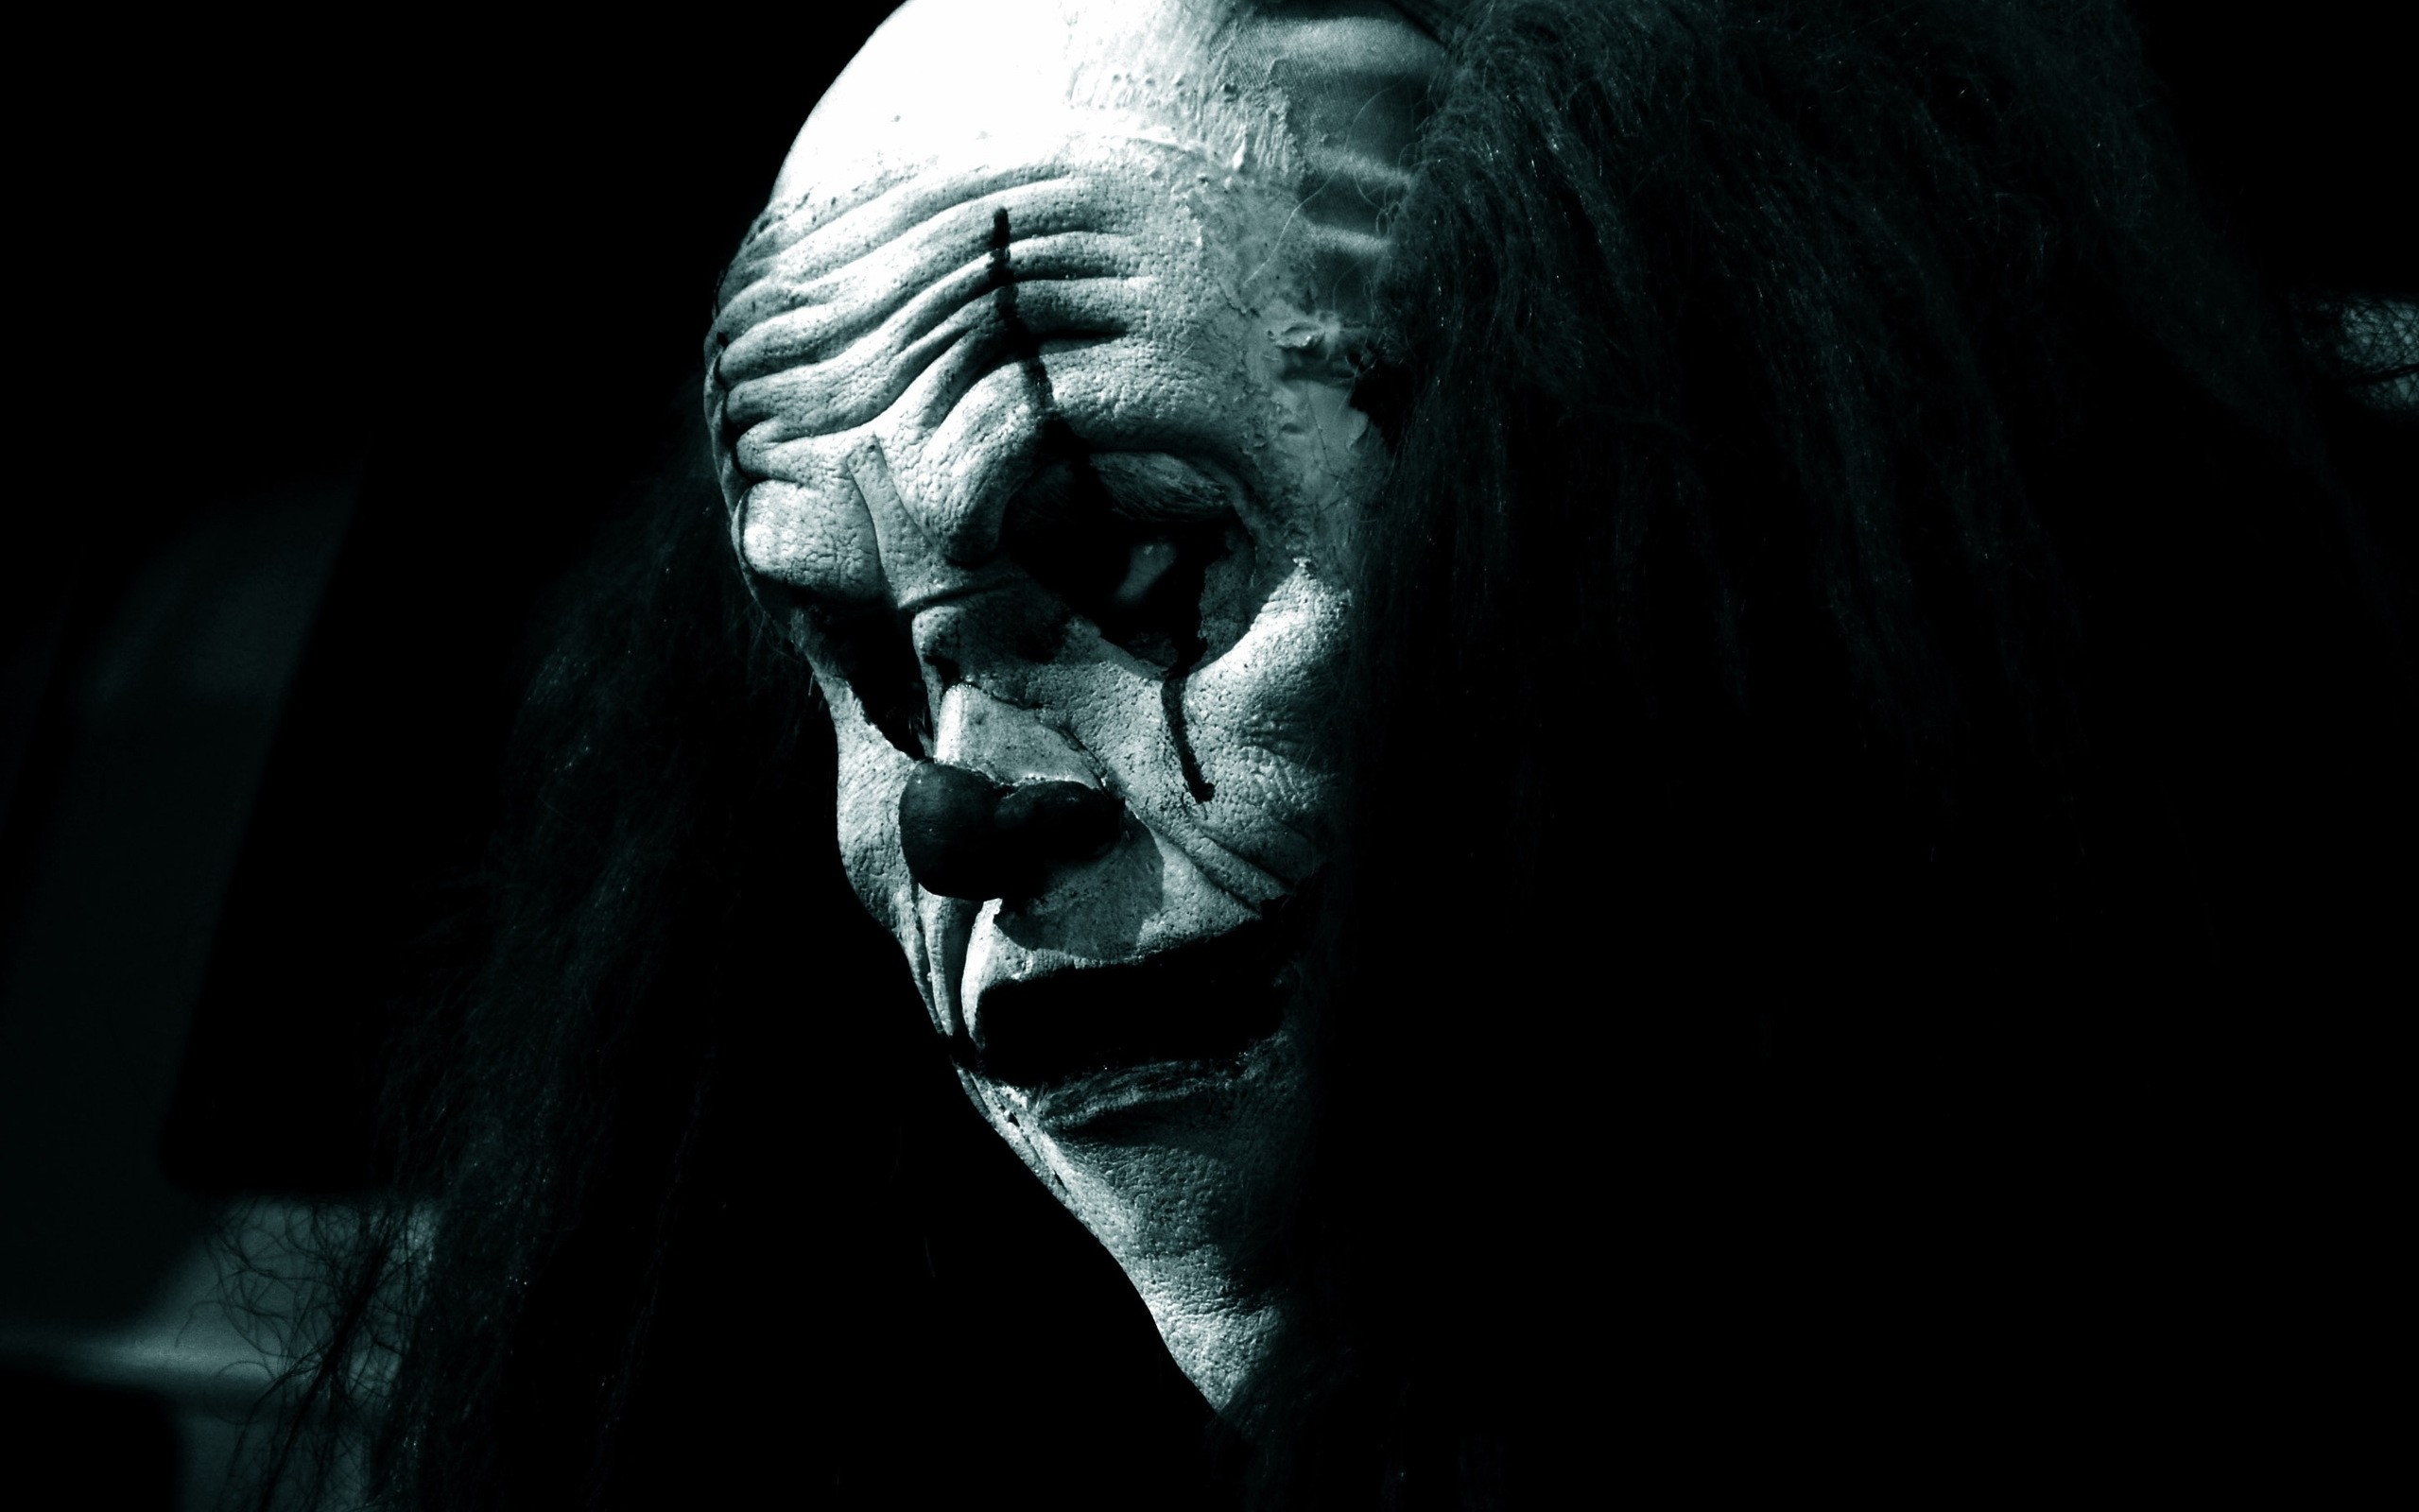 2559x1600 Title : scary clown wallpaper | scary clown wallpaper gothic. wallpapers 3d.  Dimension : 2559 x 1600. File Type : JPG/JPEG